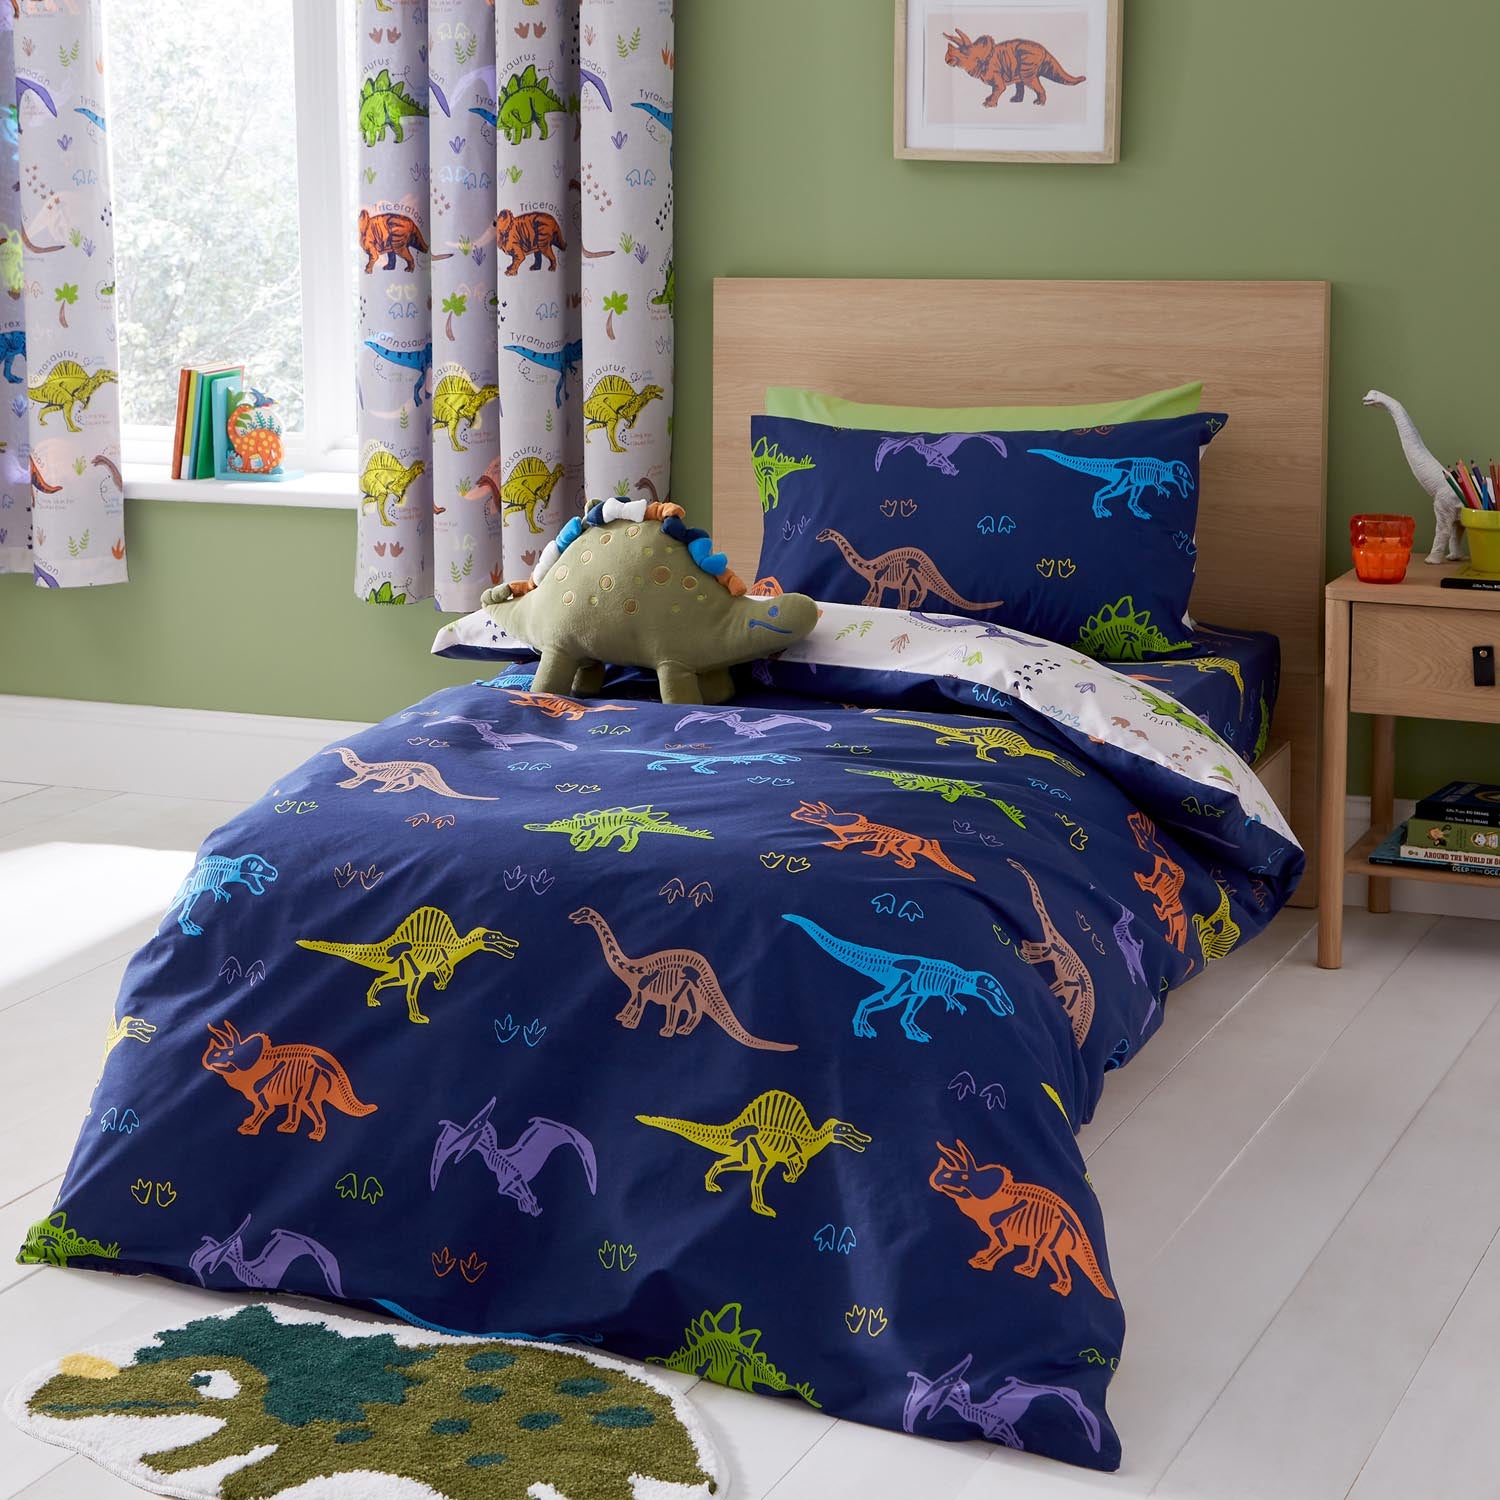 The Home Luxury Collection Dinosaurs Duvet Cover Set 2 Shaws Department Stores